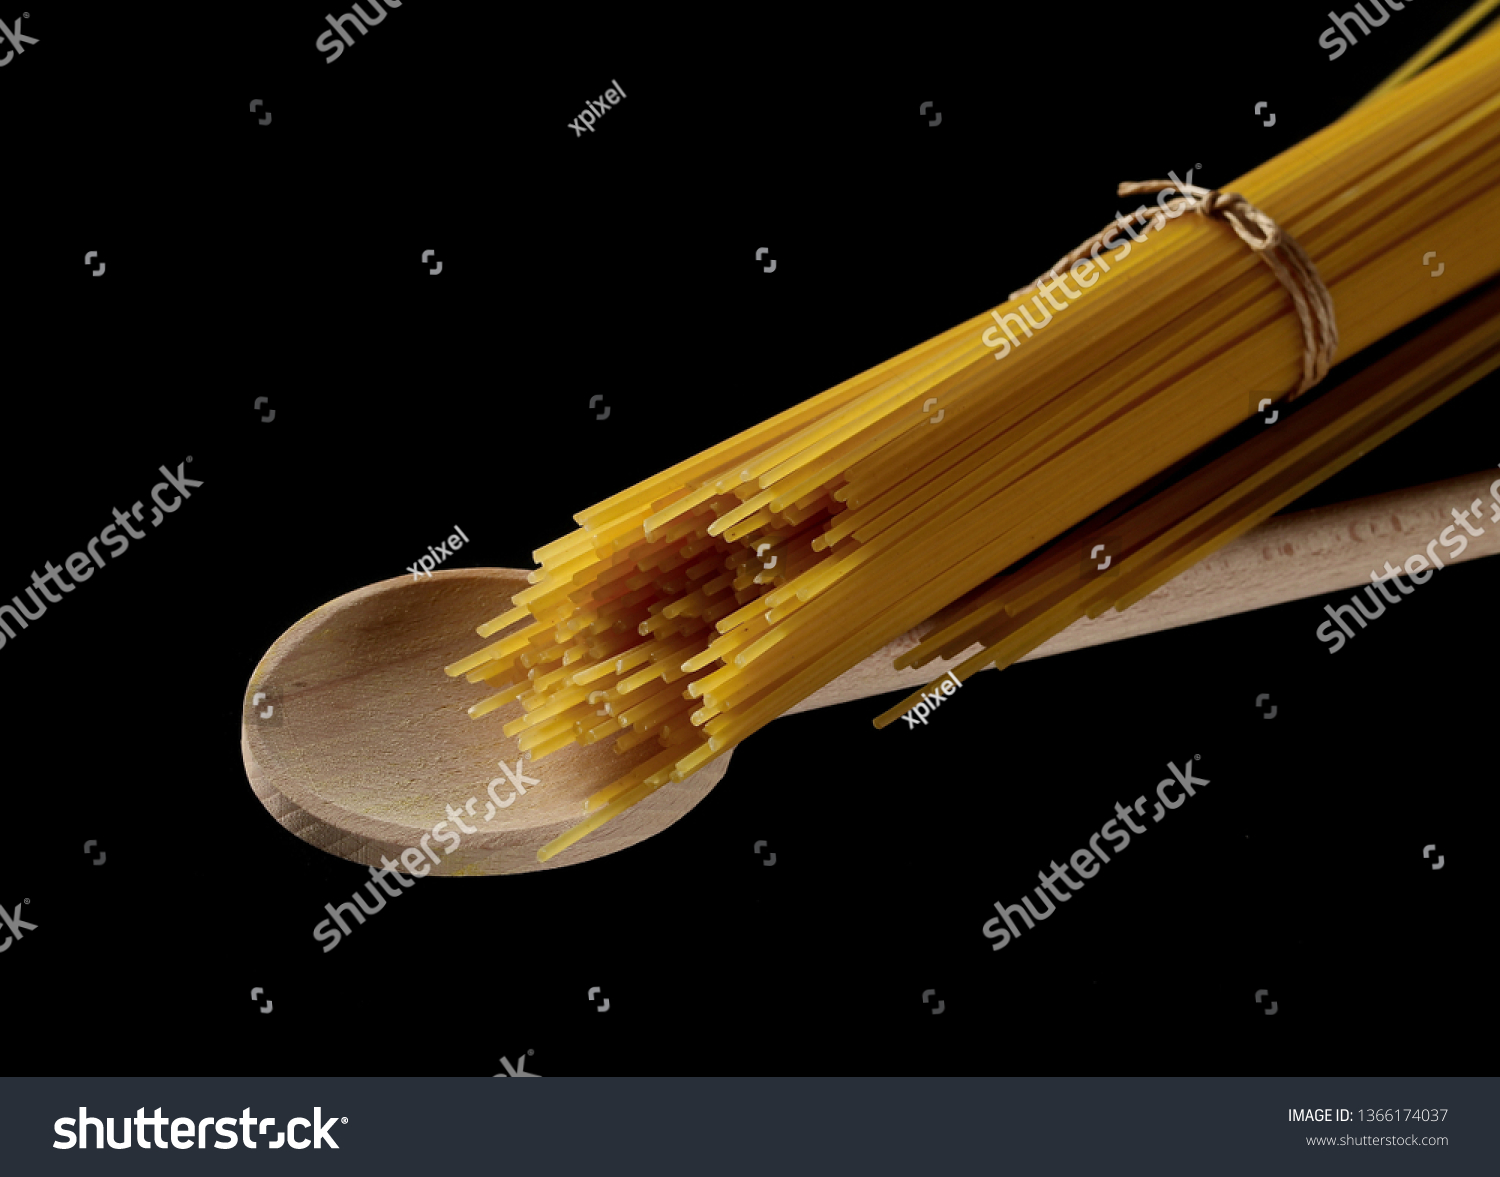 Download Spaghetti Yellow Pasta Wooden Spoon Isolated Stock Photo Edit Now 1366174037 PSD Mockup Templates